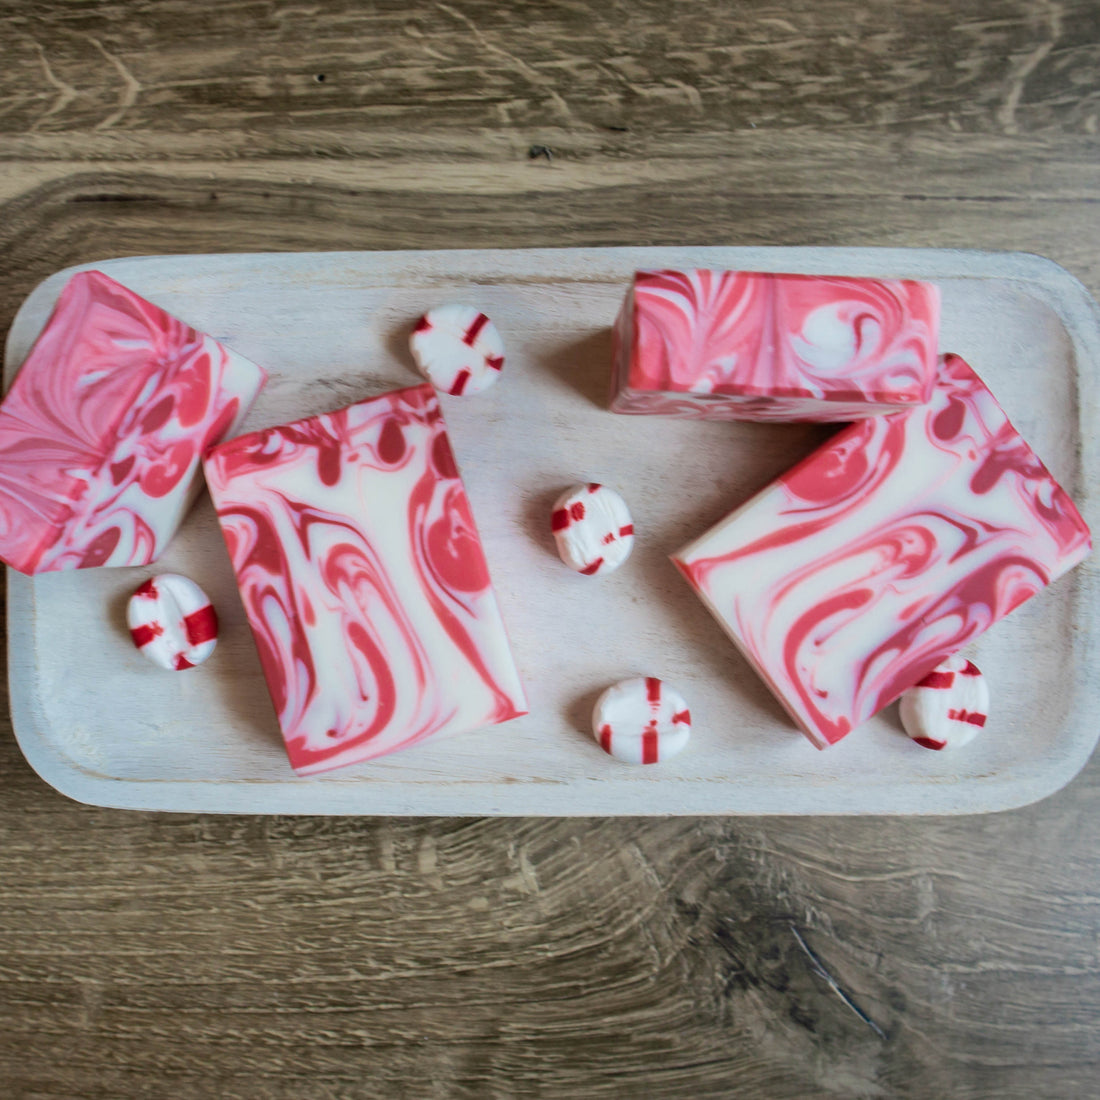 icy peppermint soaps are sitting on a light colored wood tray. 2 are laying flat showing red and pink swirls, two are standing tall showing the pretty swirled tops. there are also some hard peppermint candy scattered around the soaps